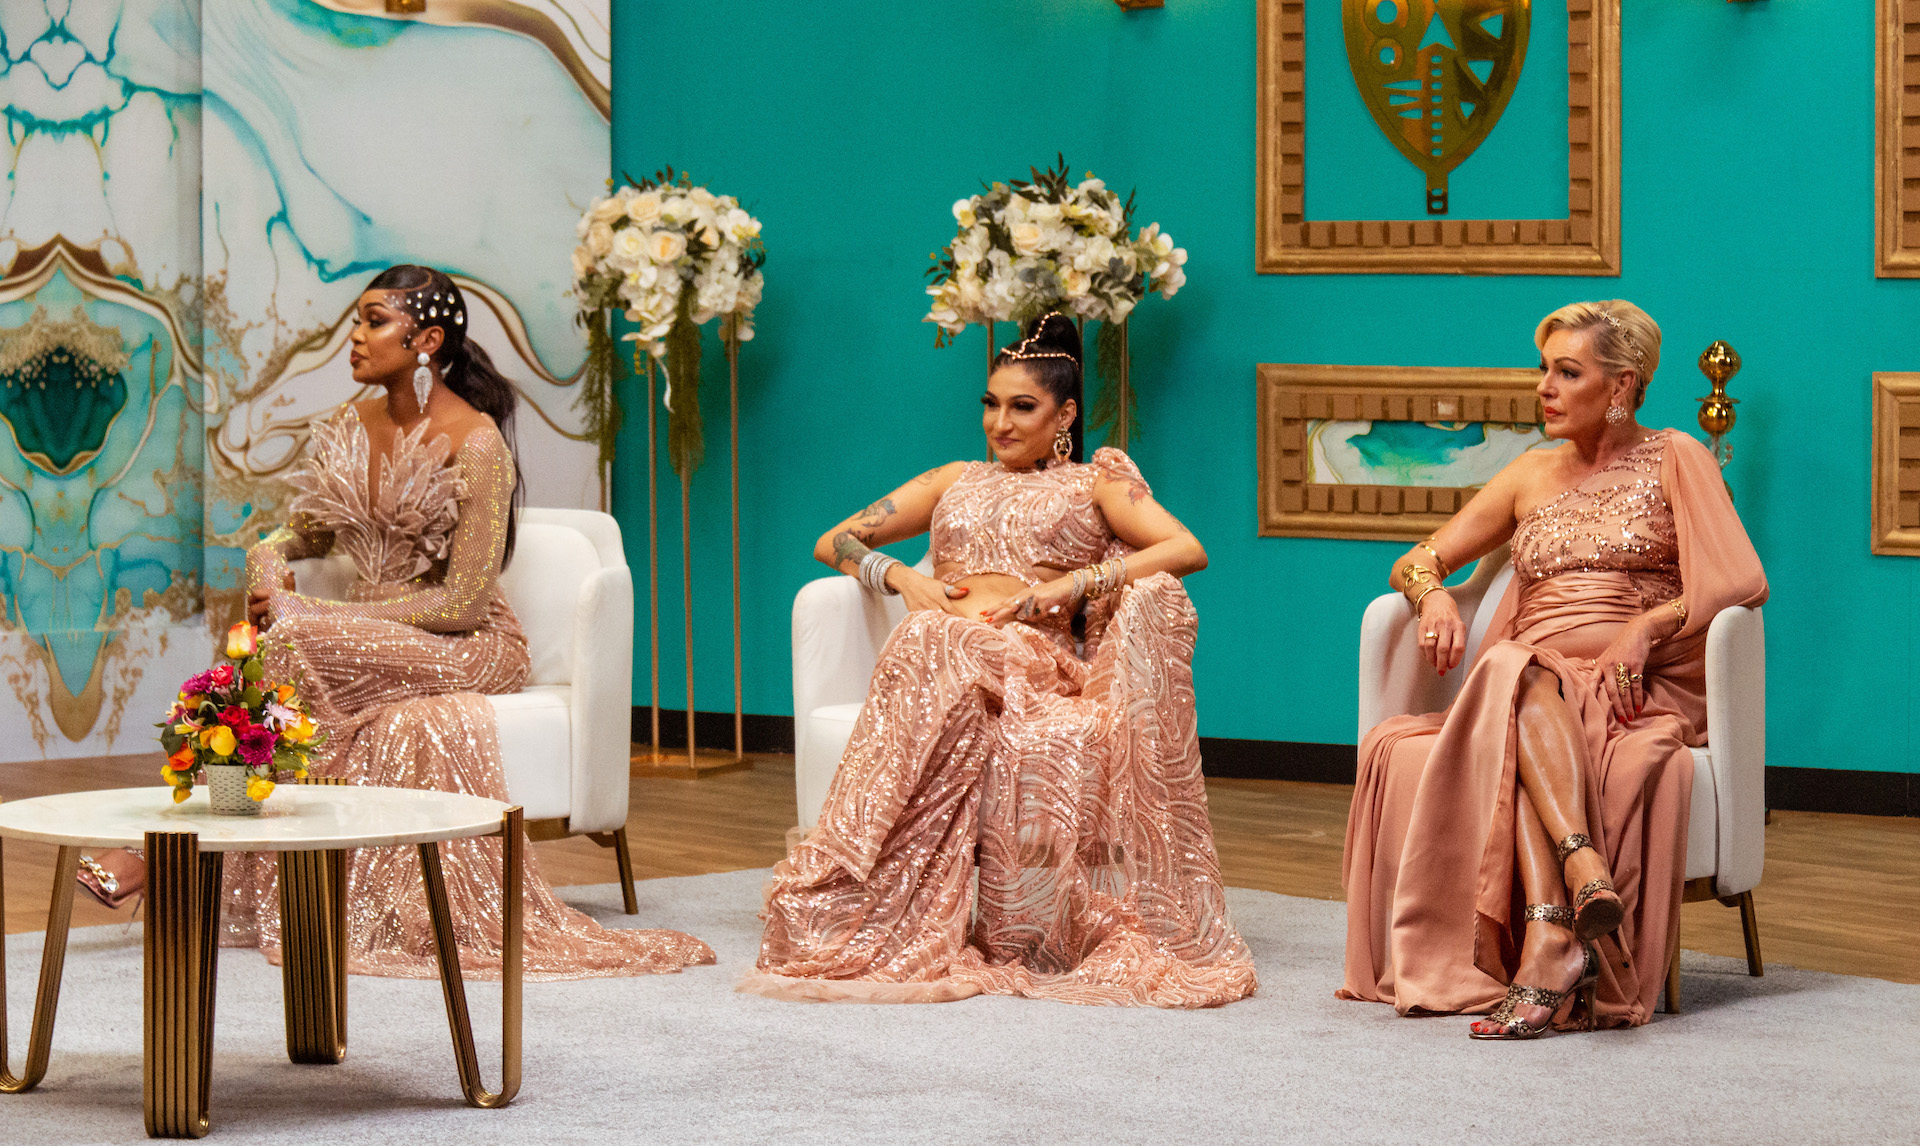 Minne, Sonal and Lisa in The Real Housewives of Nairobi Reunion